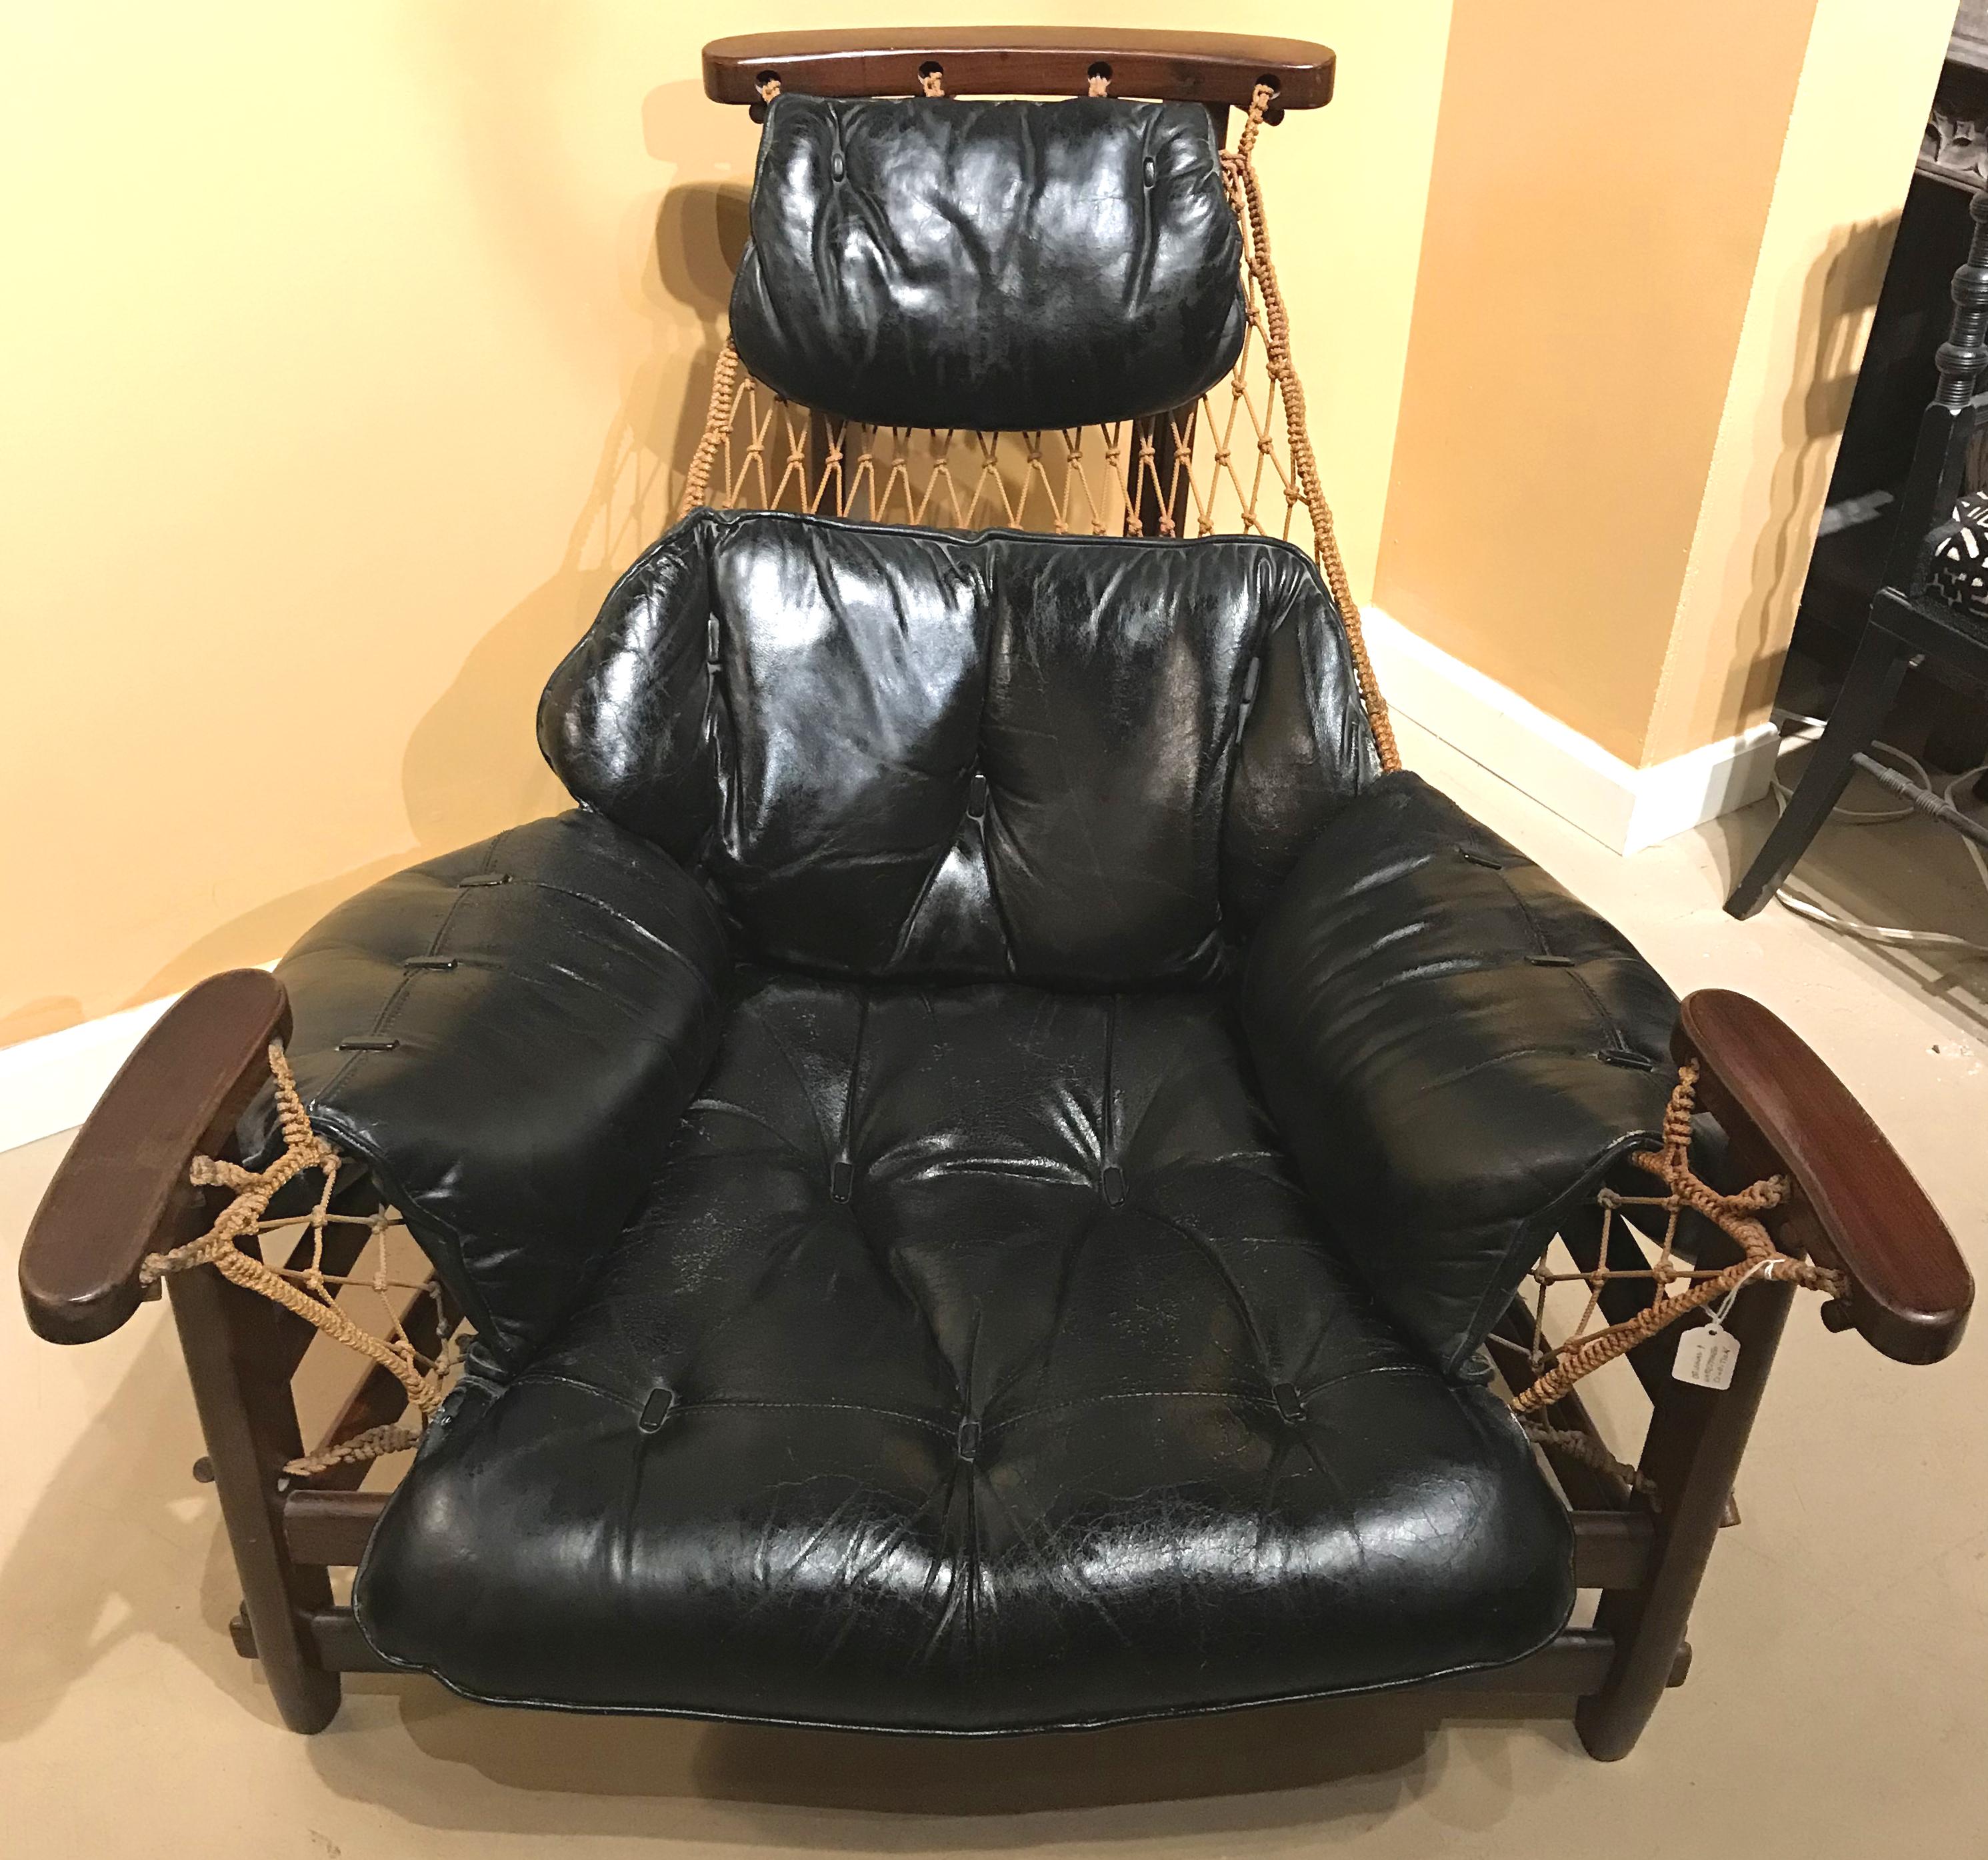 A fabulous Brazilian midcentury gran captain or “Jangada” lounge chair in jacaranda wood with distressed black tufted leather seat in woven rope sling designed by Jean Gillon and produced by Italma Wood Art, circa 1960. An Italma Wood Art label